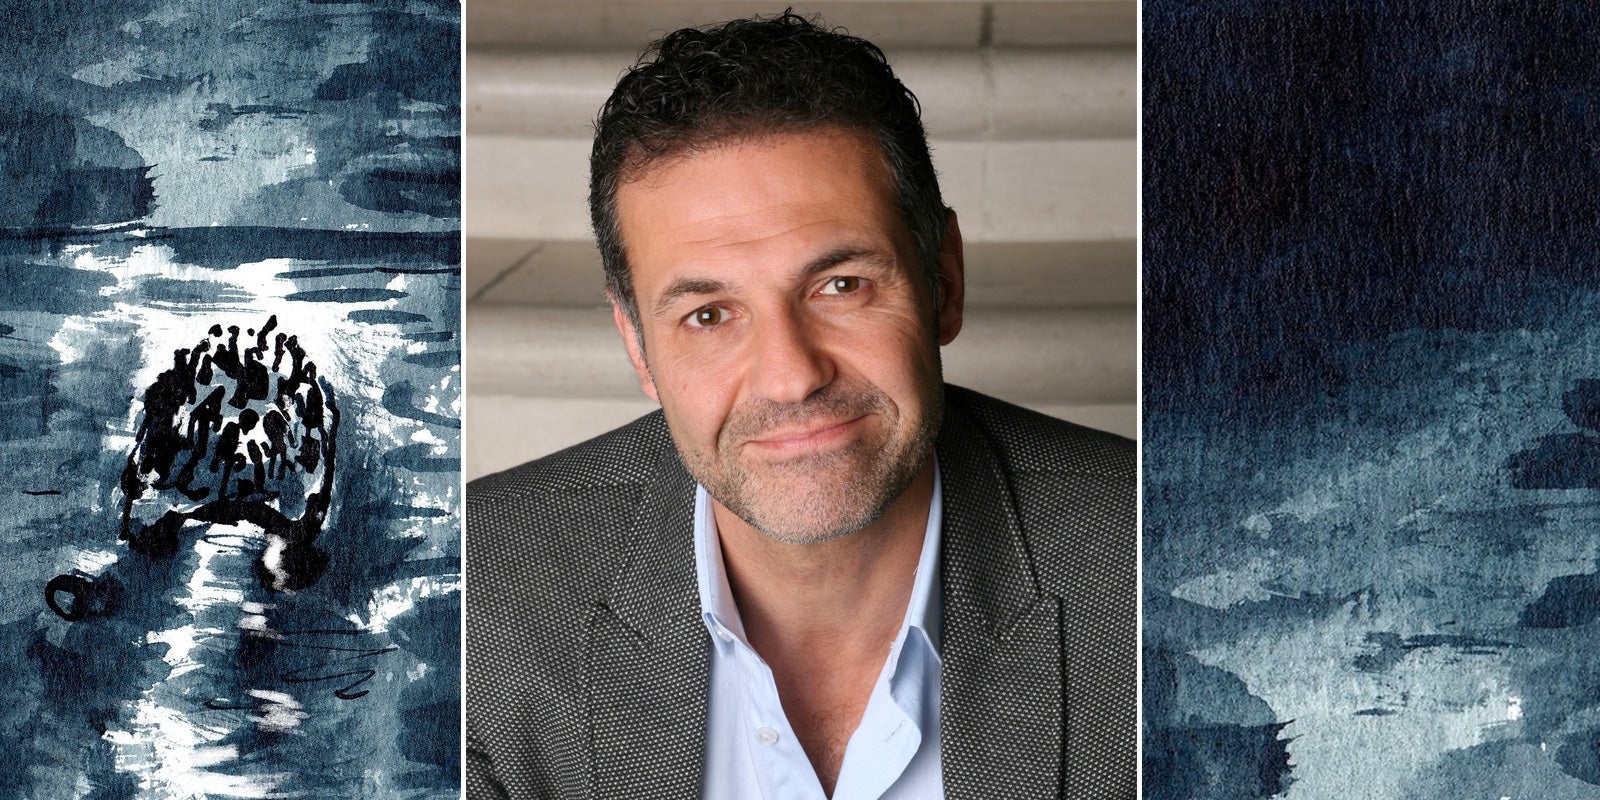 Riverhead to Publish Illustrated Book About the Refugee Crisis by Khaled Hosseini this Fall